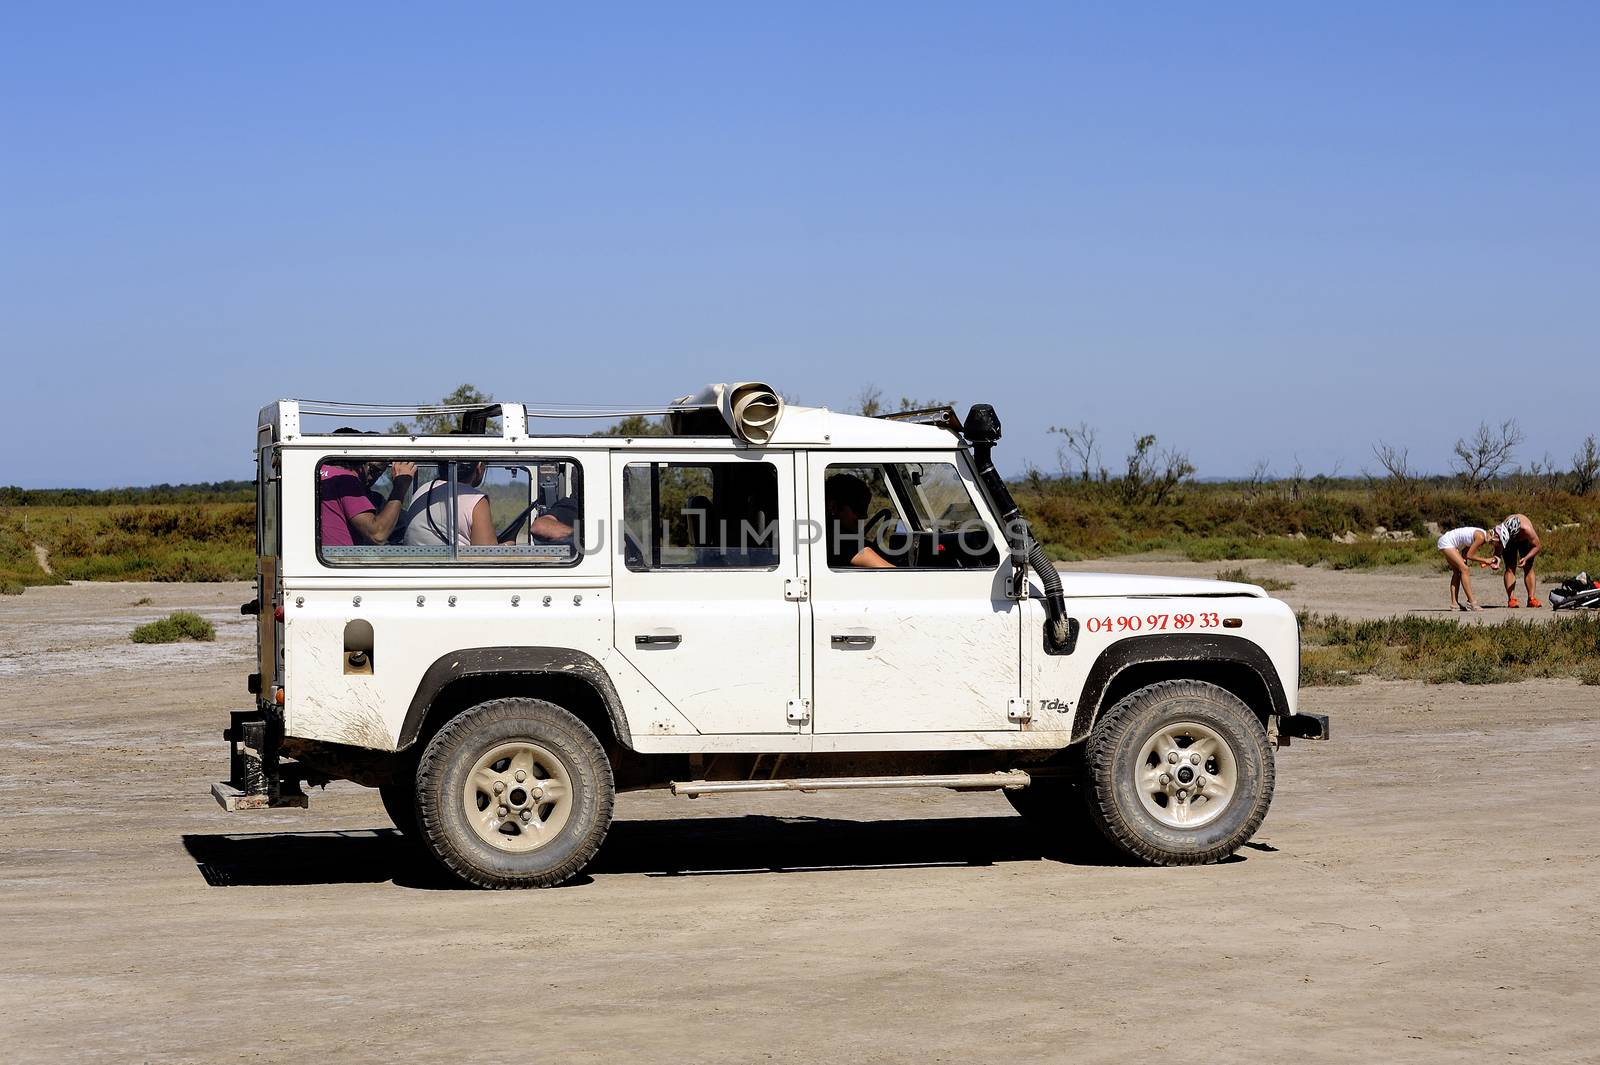 Tourists visiting the Camargue 4x4 by gillespaire